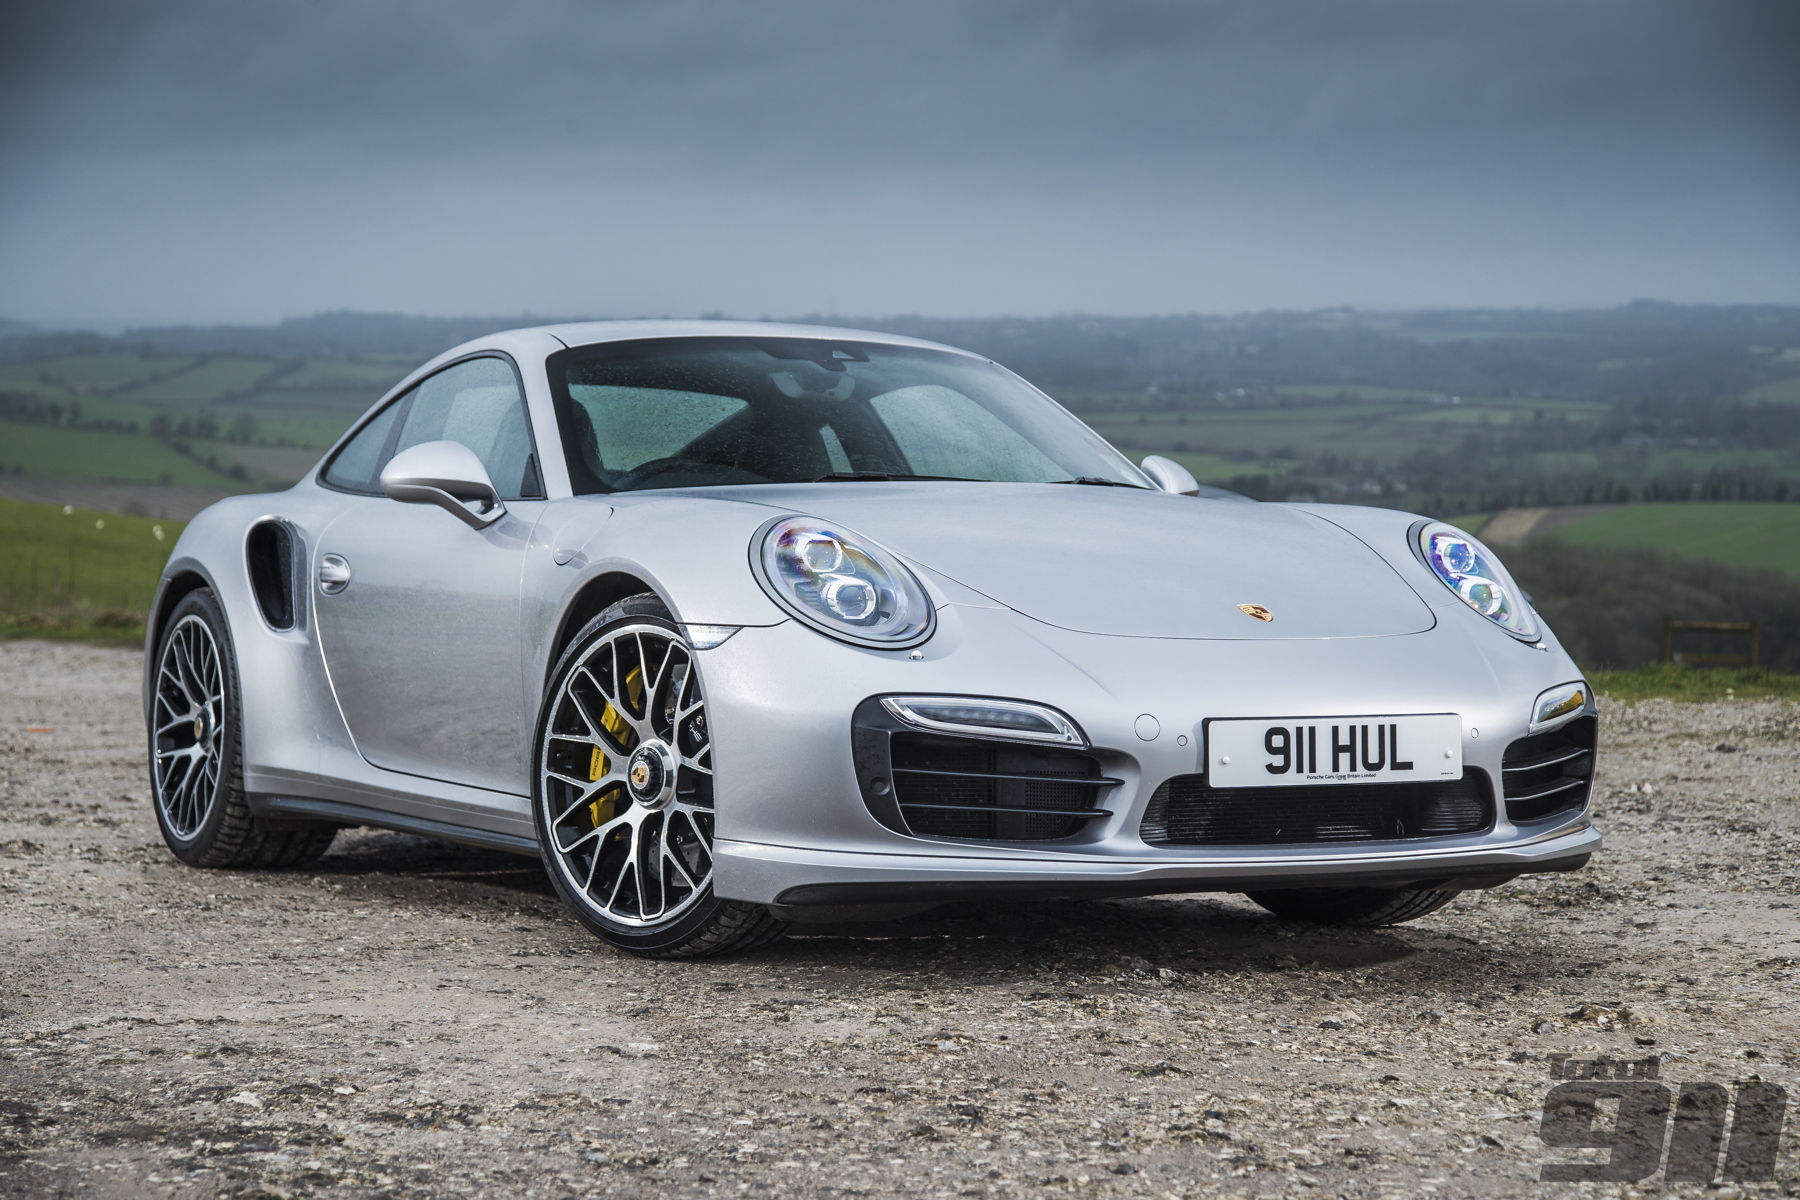 Opinion: Is the new Porsche 911 Turbo enough? | Total 911